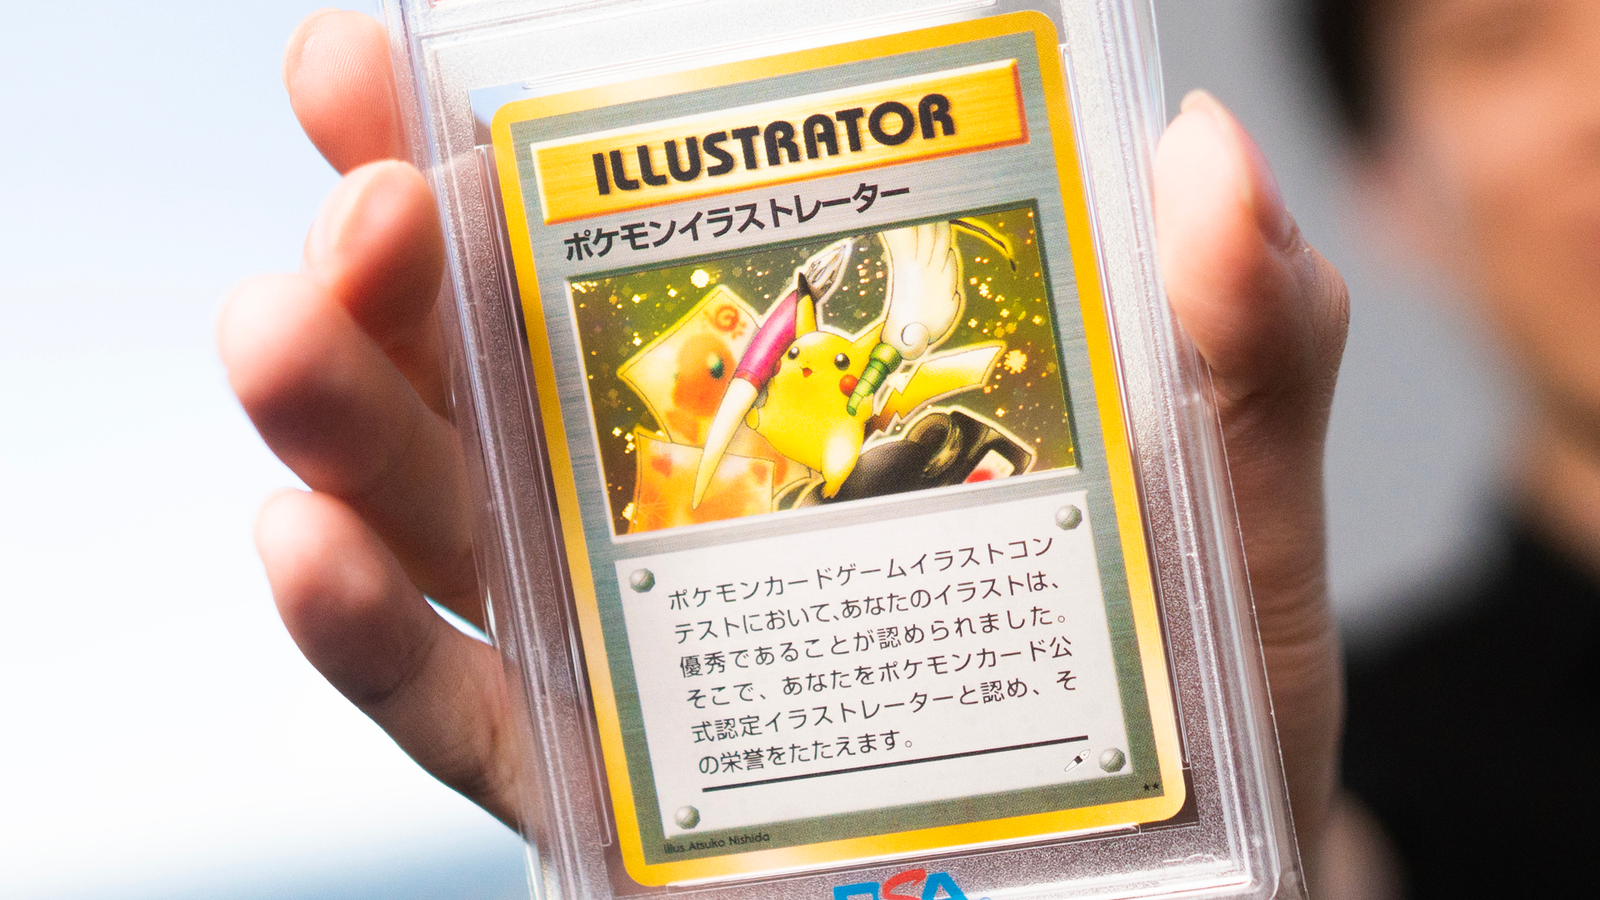 World's most valuable Pokémon card, Pikachu Illustrator, appears at auction  for almost half a million dollars | Dicebreaker